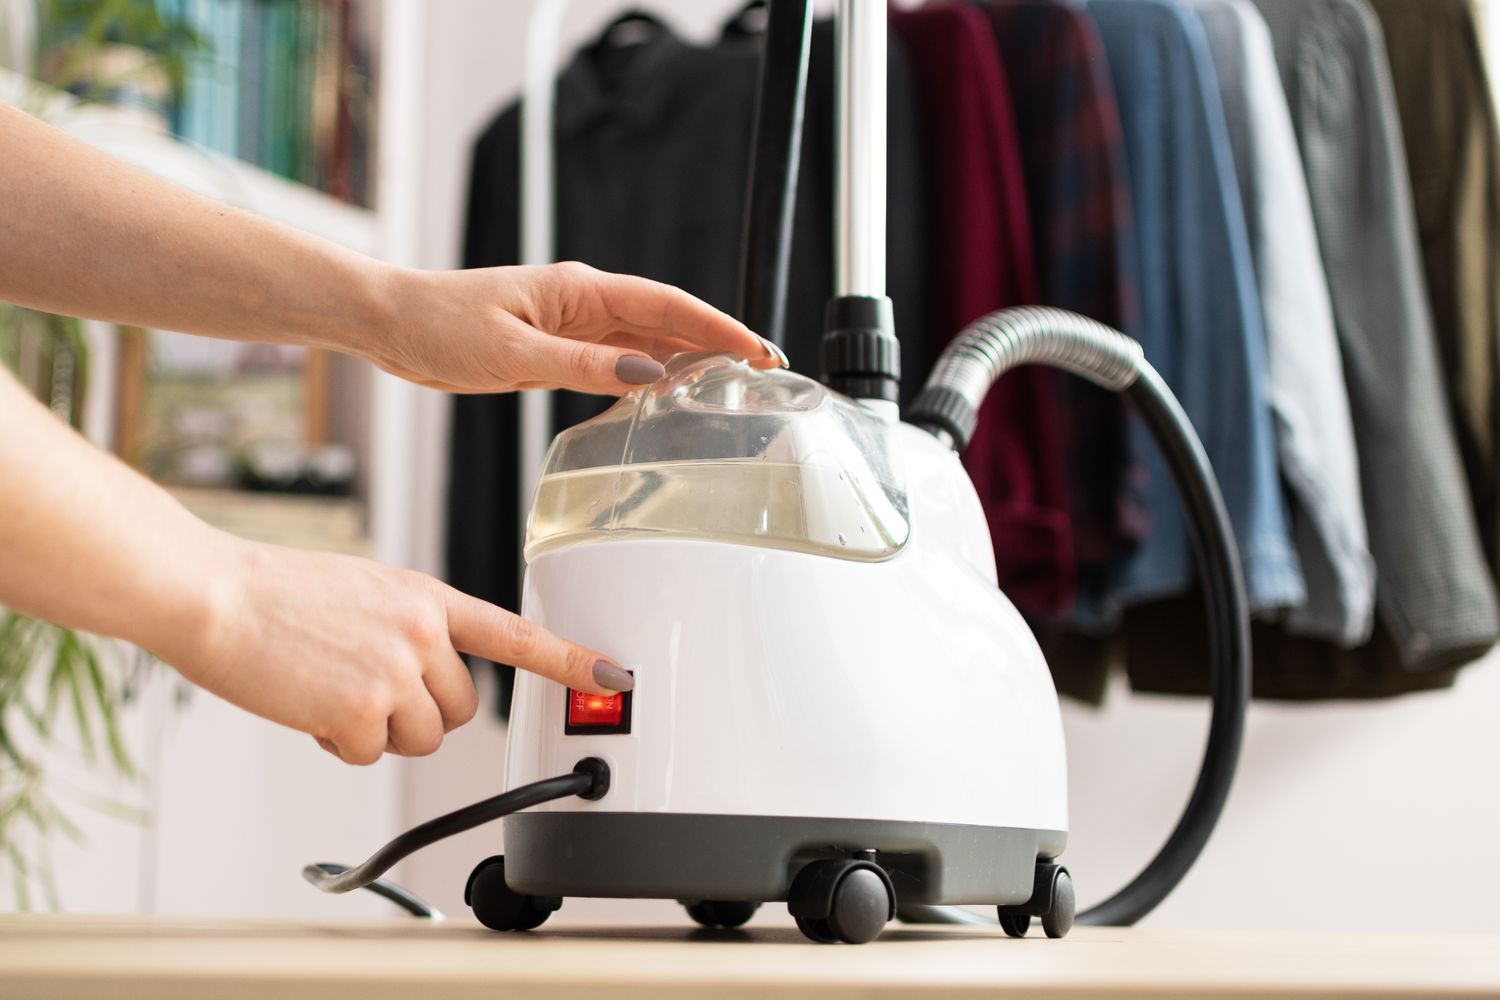 How To Use A Steamer For Clothes